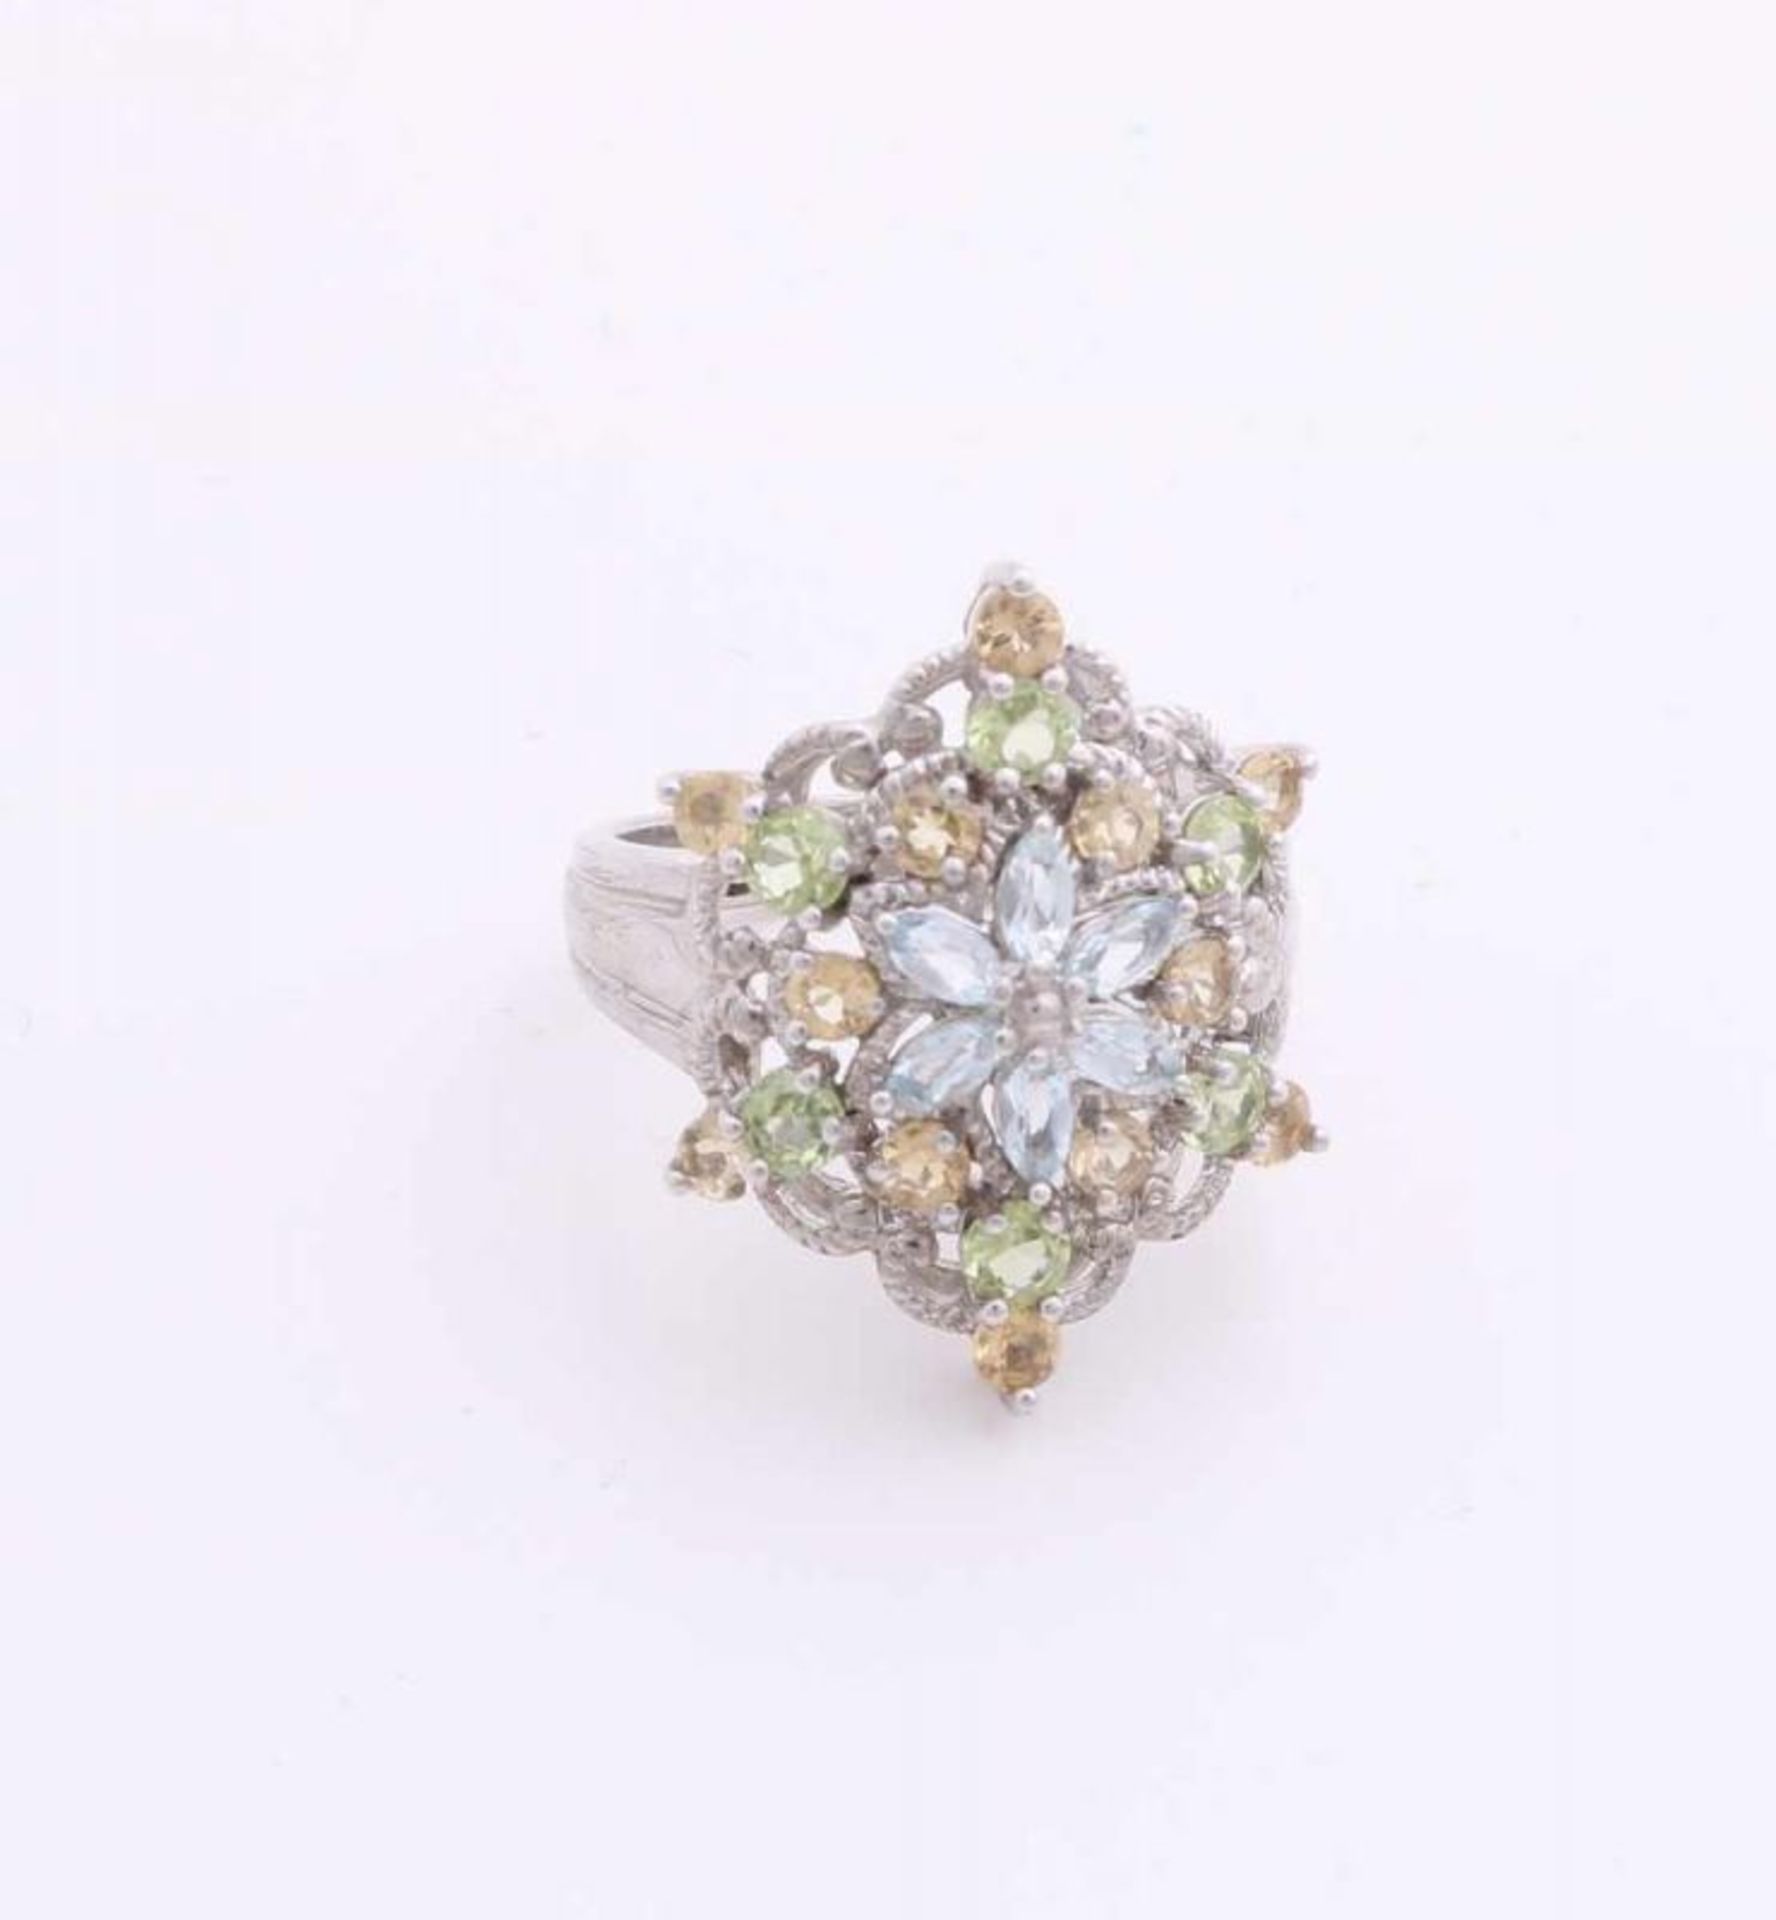 Silver ring, 925/000 with a star shape made of precious stones. Striking ring with the head in the